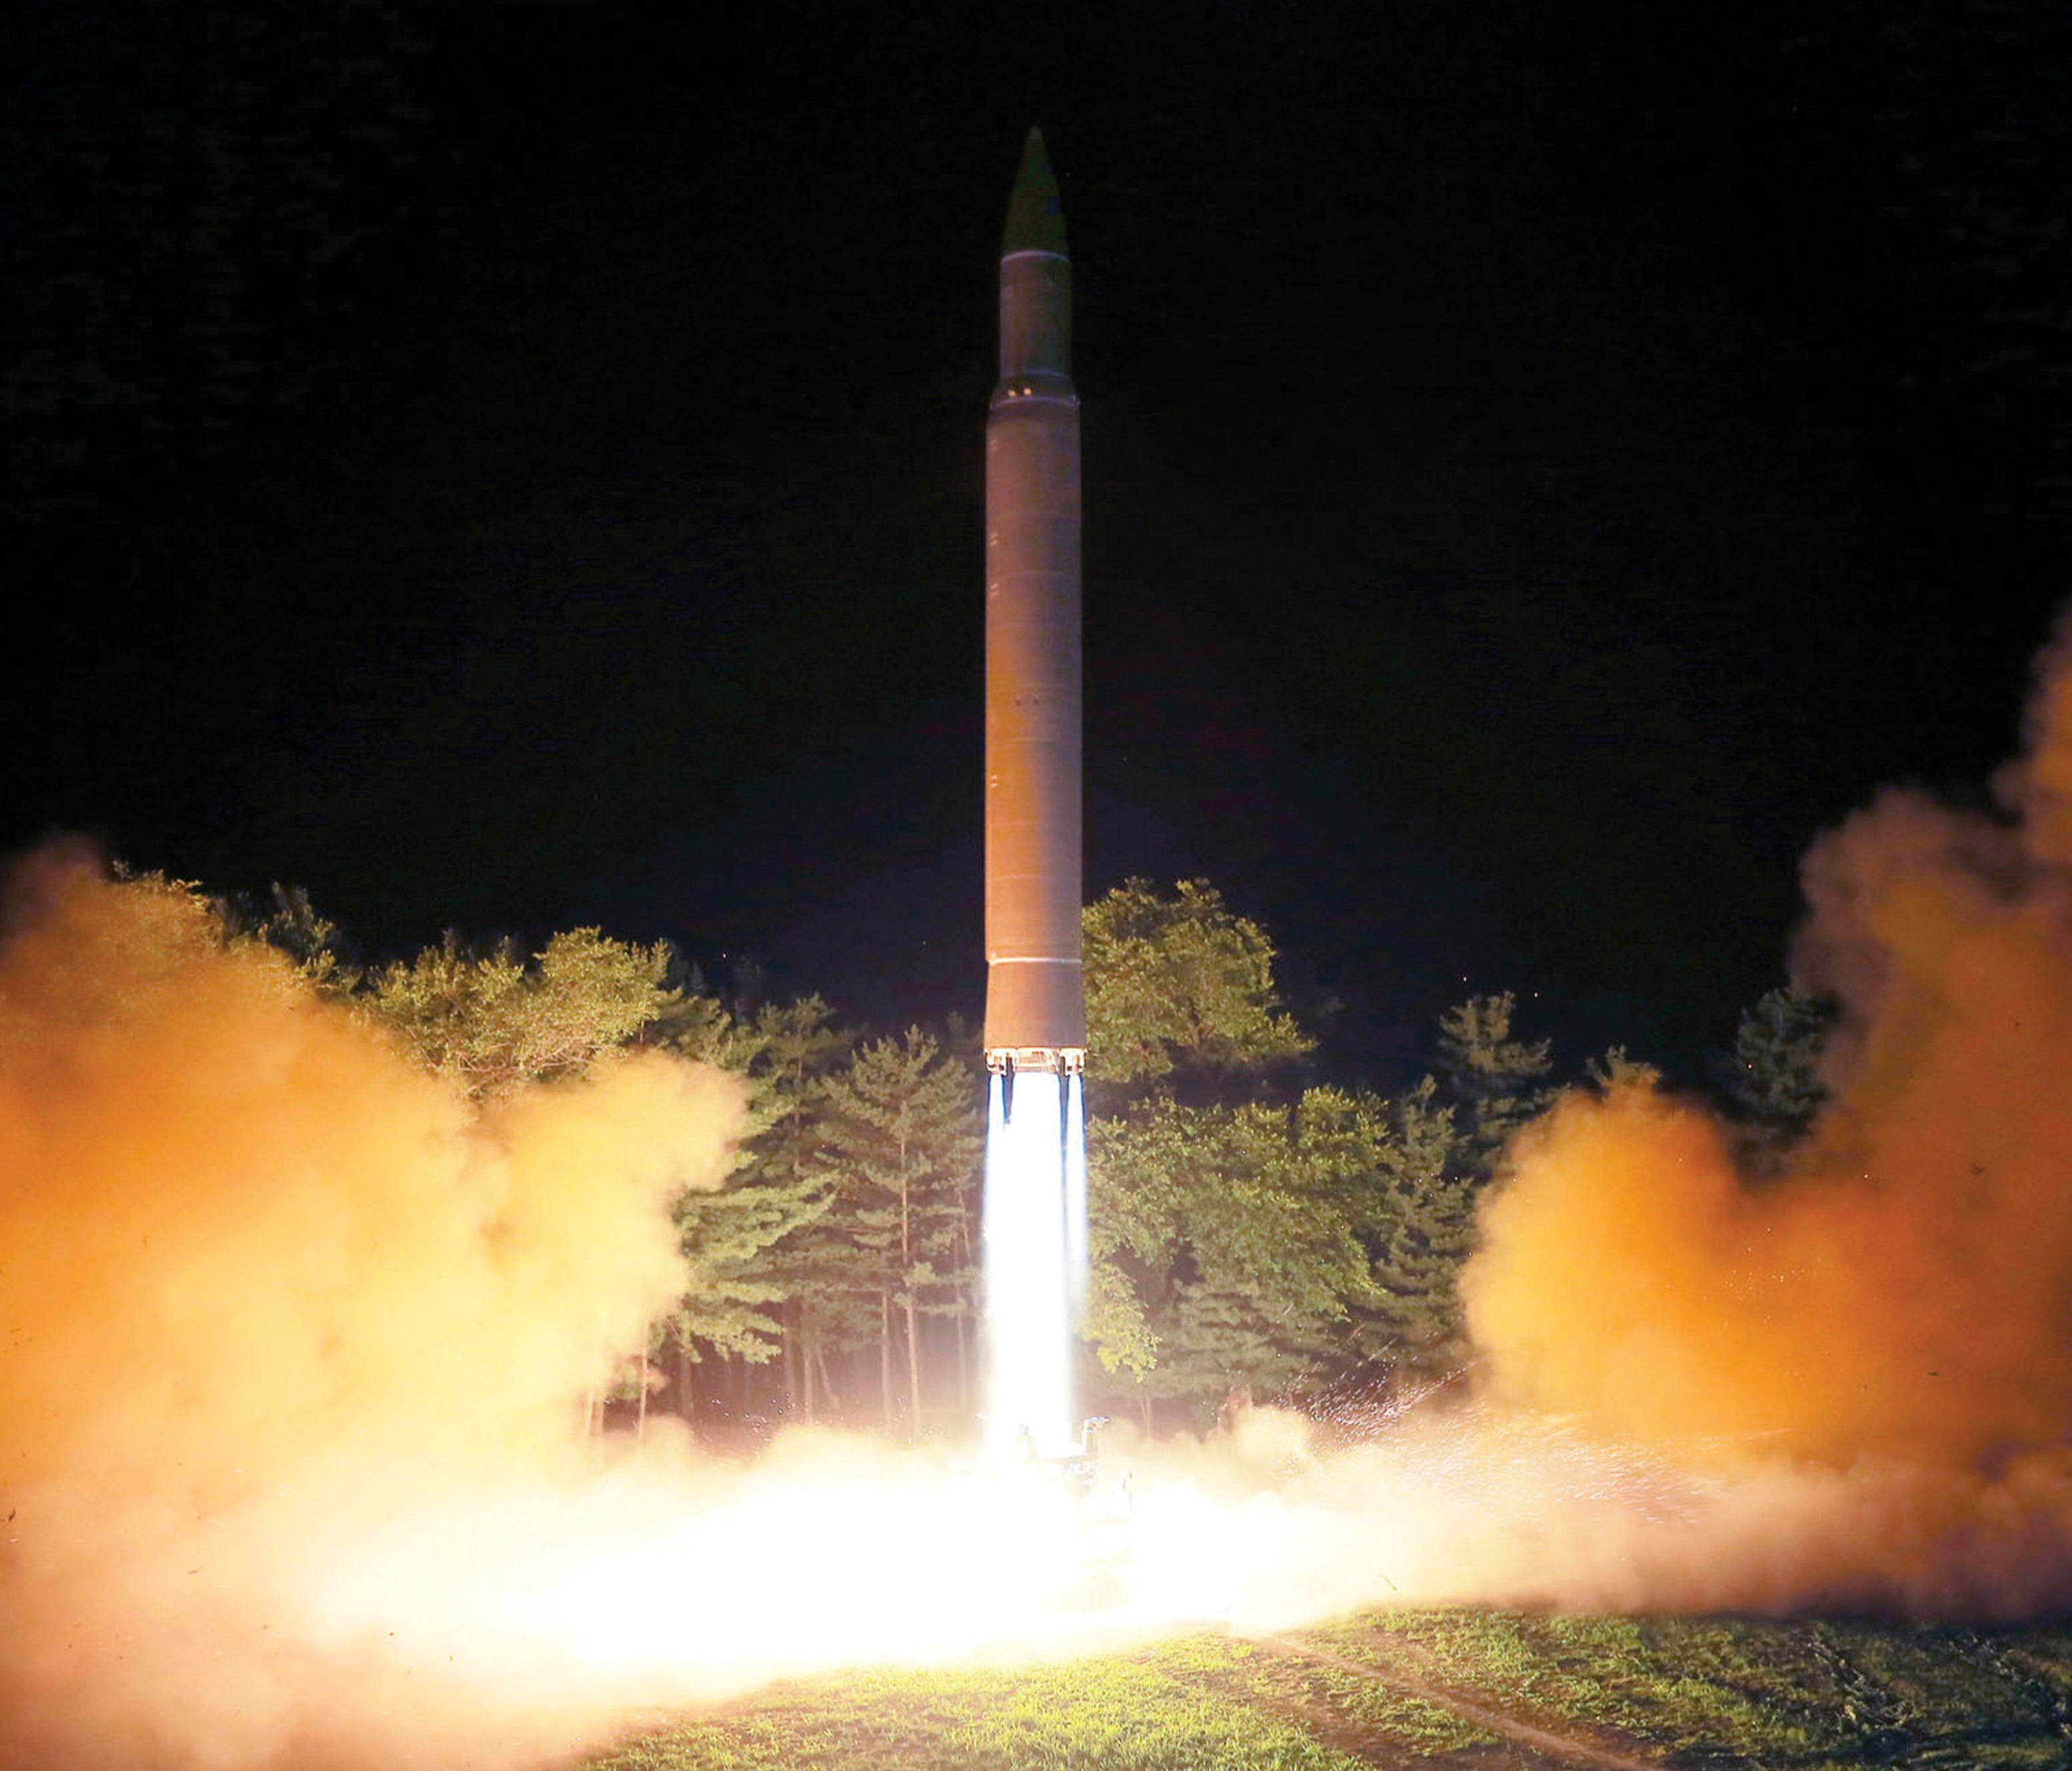 This file photo, distributed by the North Korean government, shows what was said to be the launch of a Hwasong-14 intercontinental ballistic missile at an undisclosed location in North Korea.